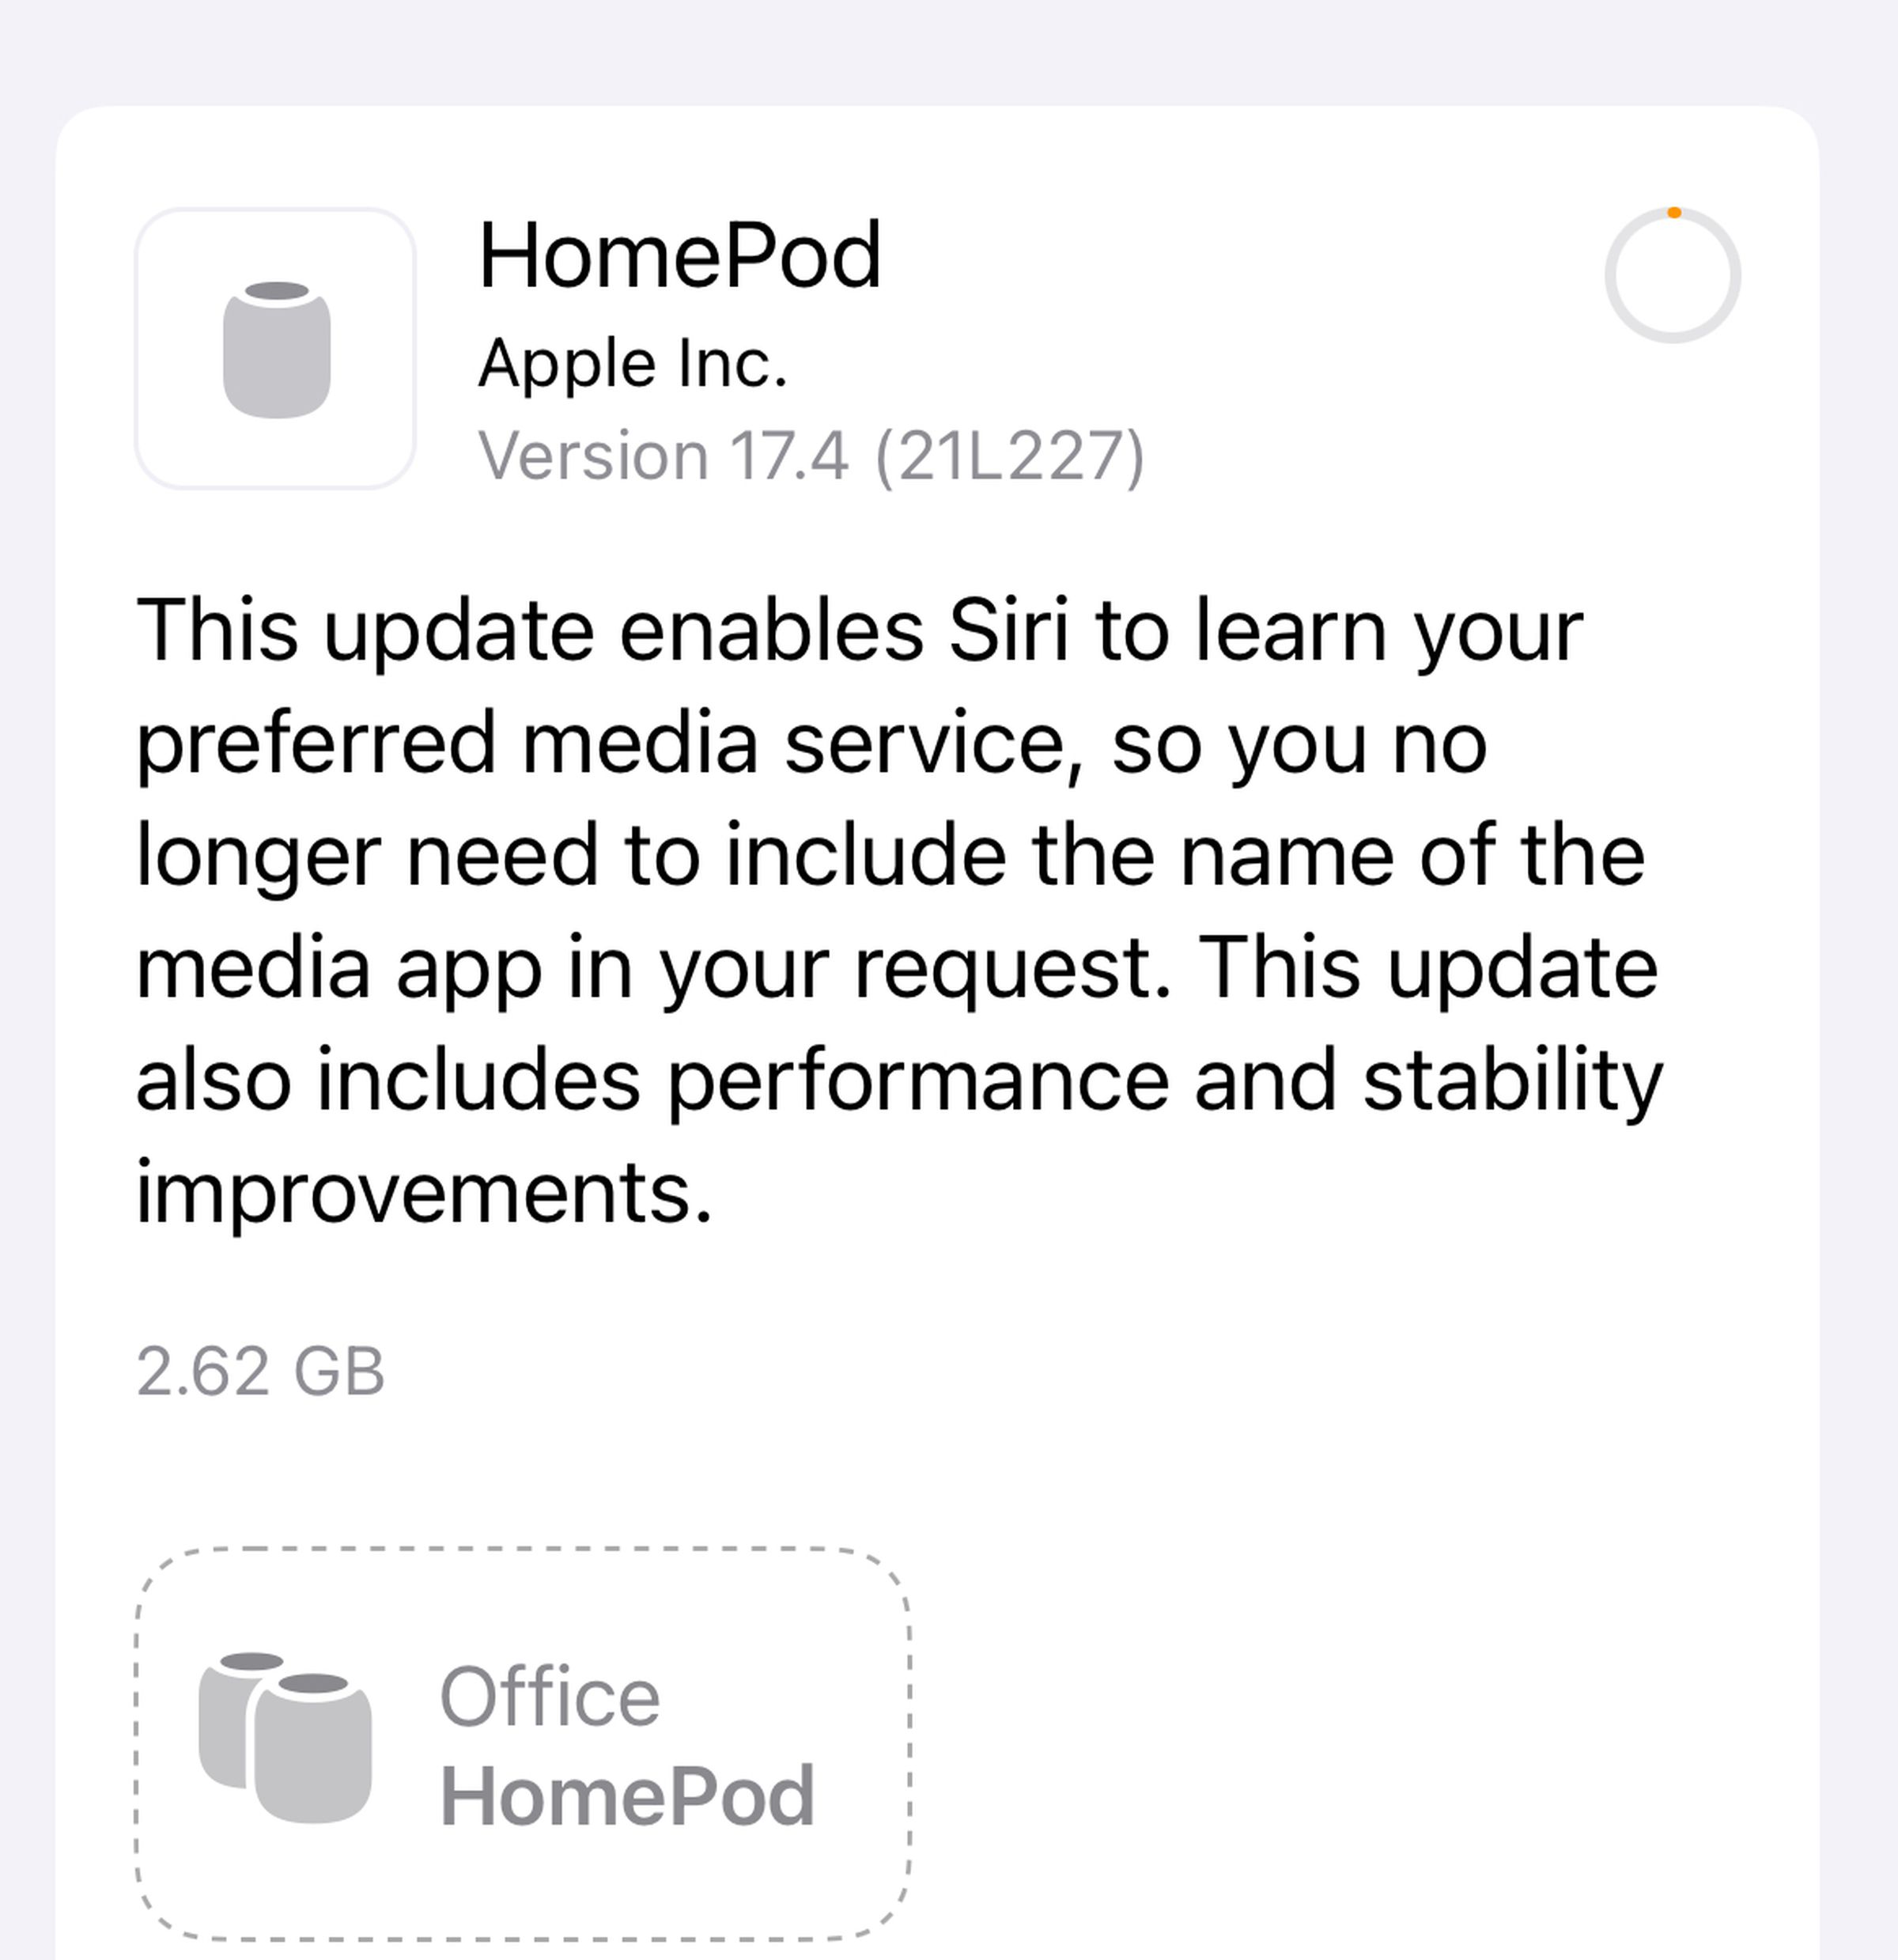 Apple’s update notes for HomePod software 17.4, “This update enables Siri to learn your preferred media service, so you no longer need to include the name of the media app in your request. This update also includes performance and stability improvements.”